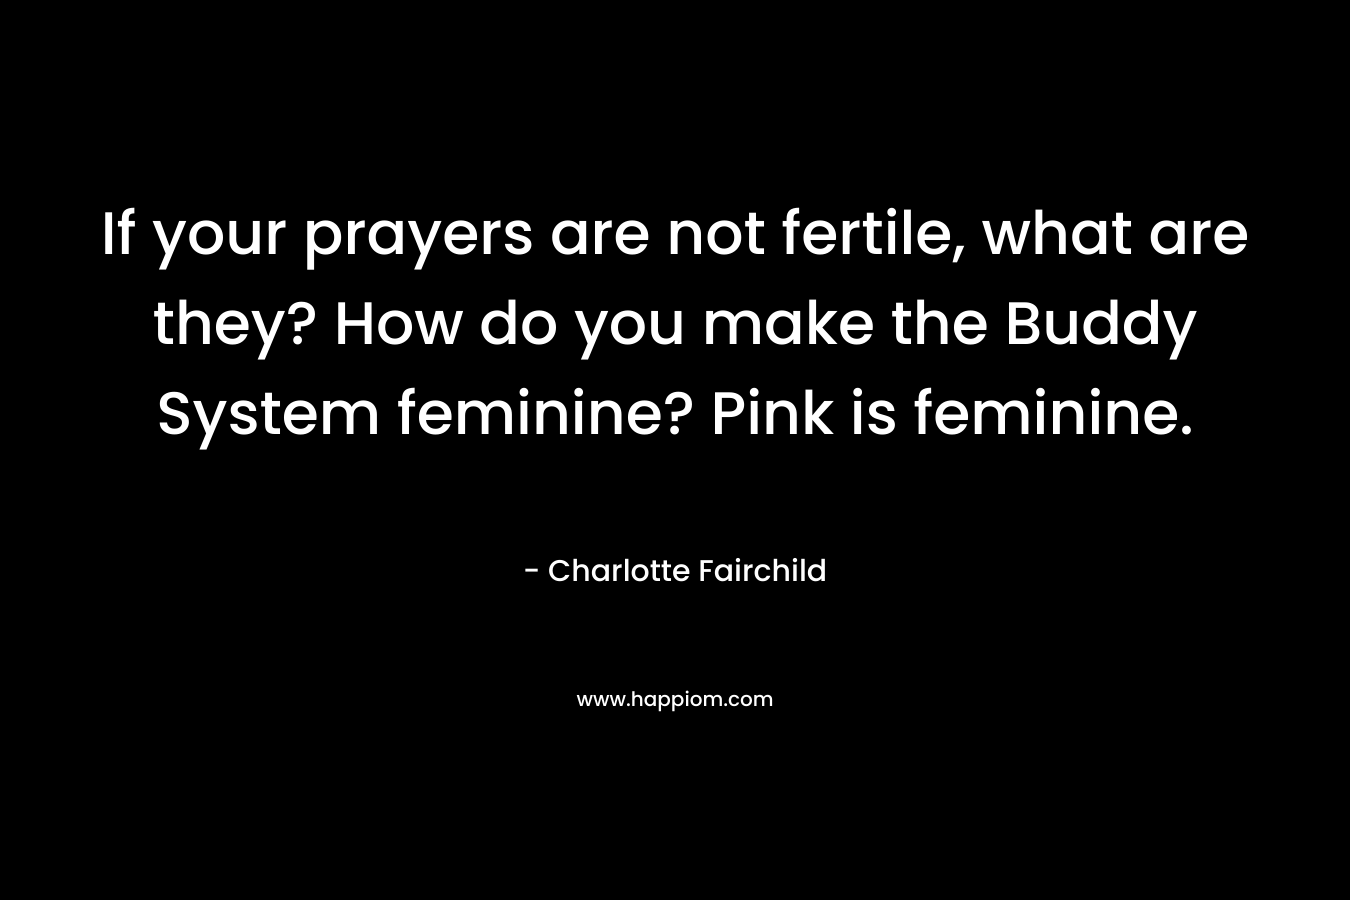 If your prayers are not fertile, what are they? How do you make the Buddy System feminine? Pink is feminine. – Charlotte Fairchild